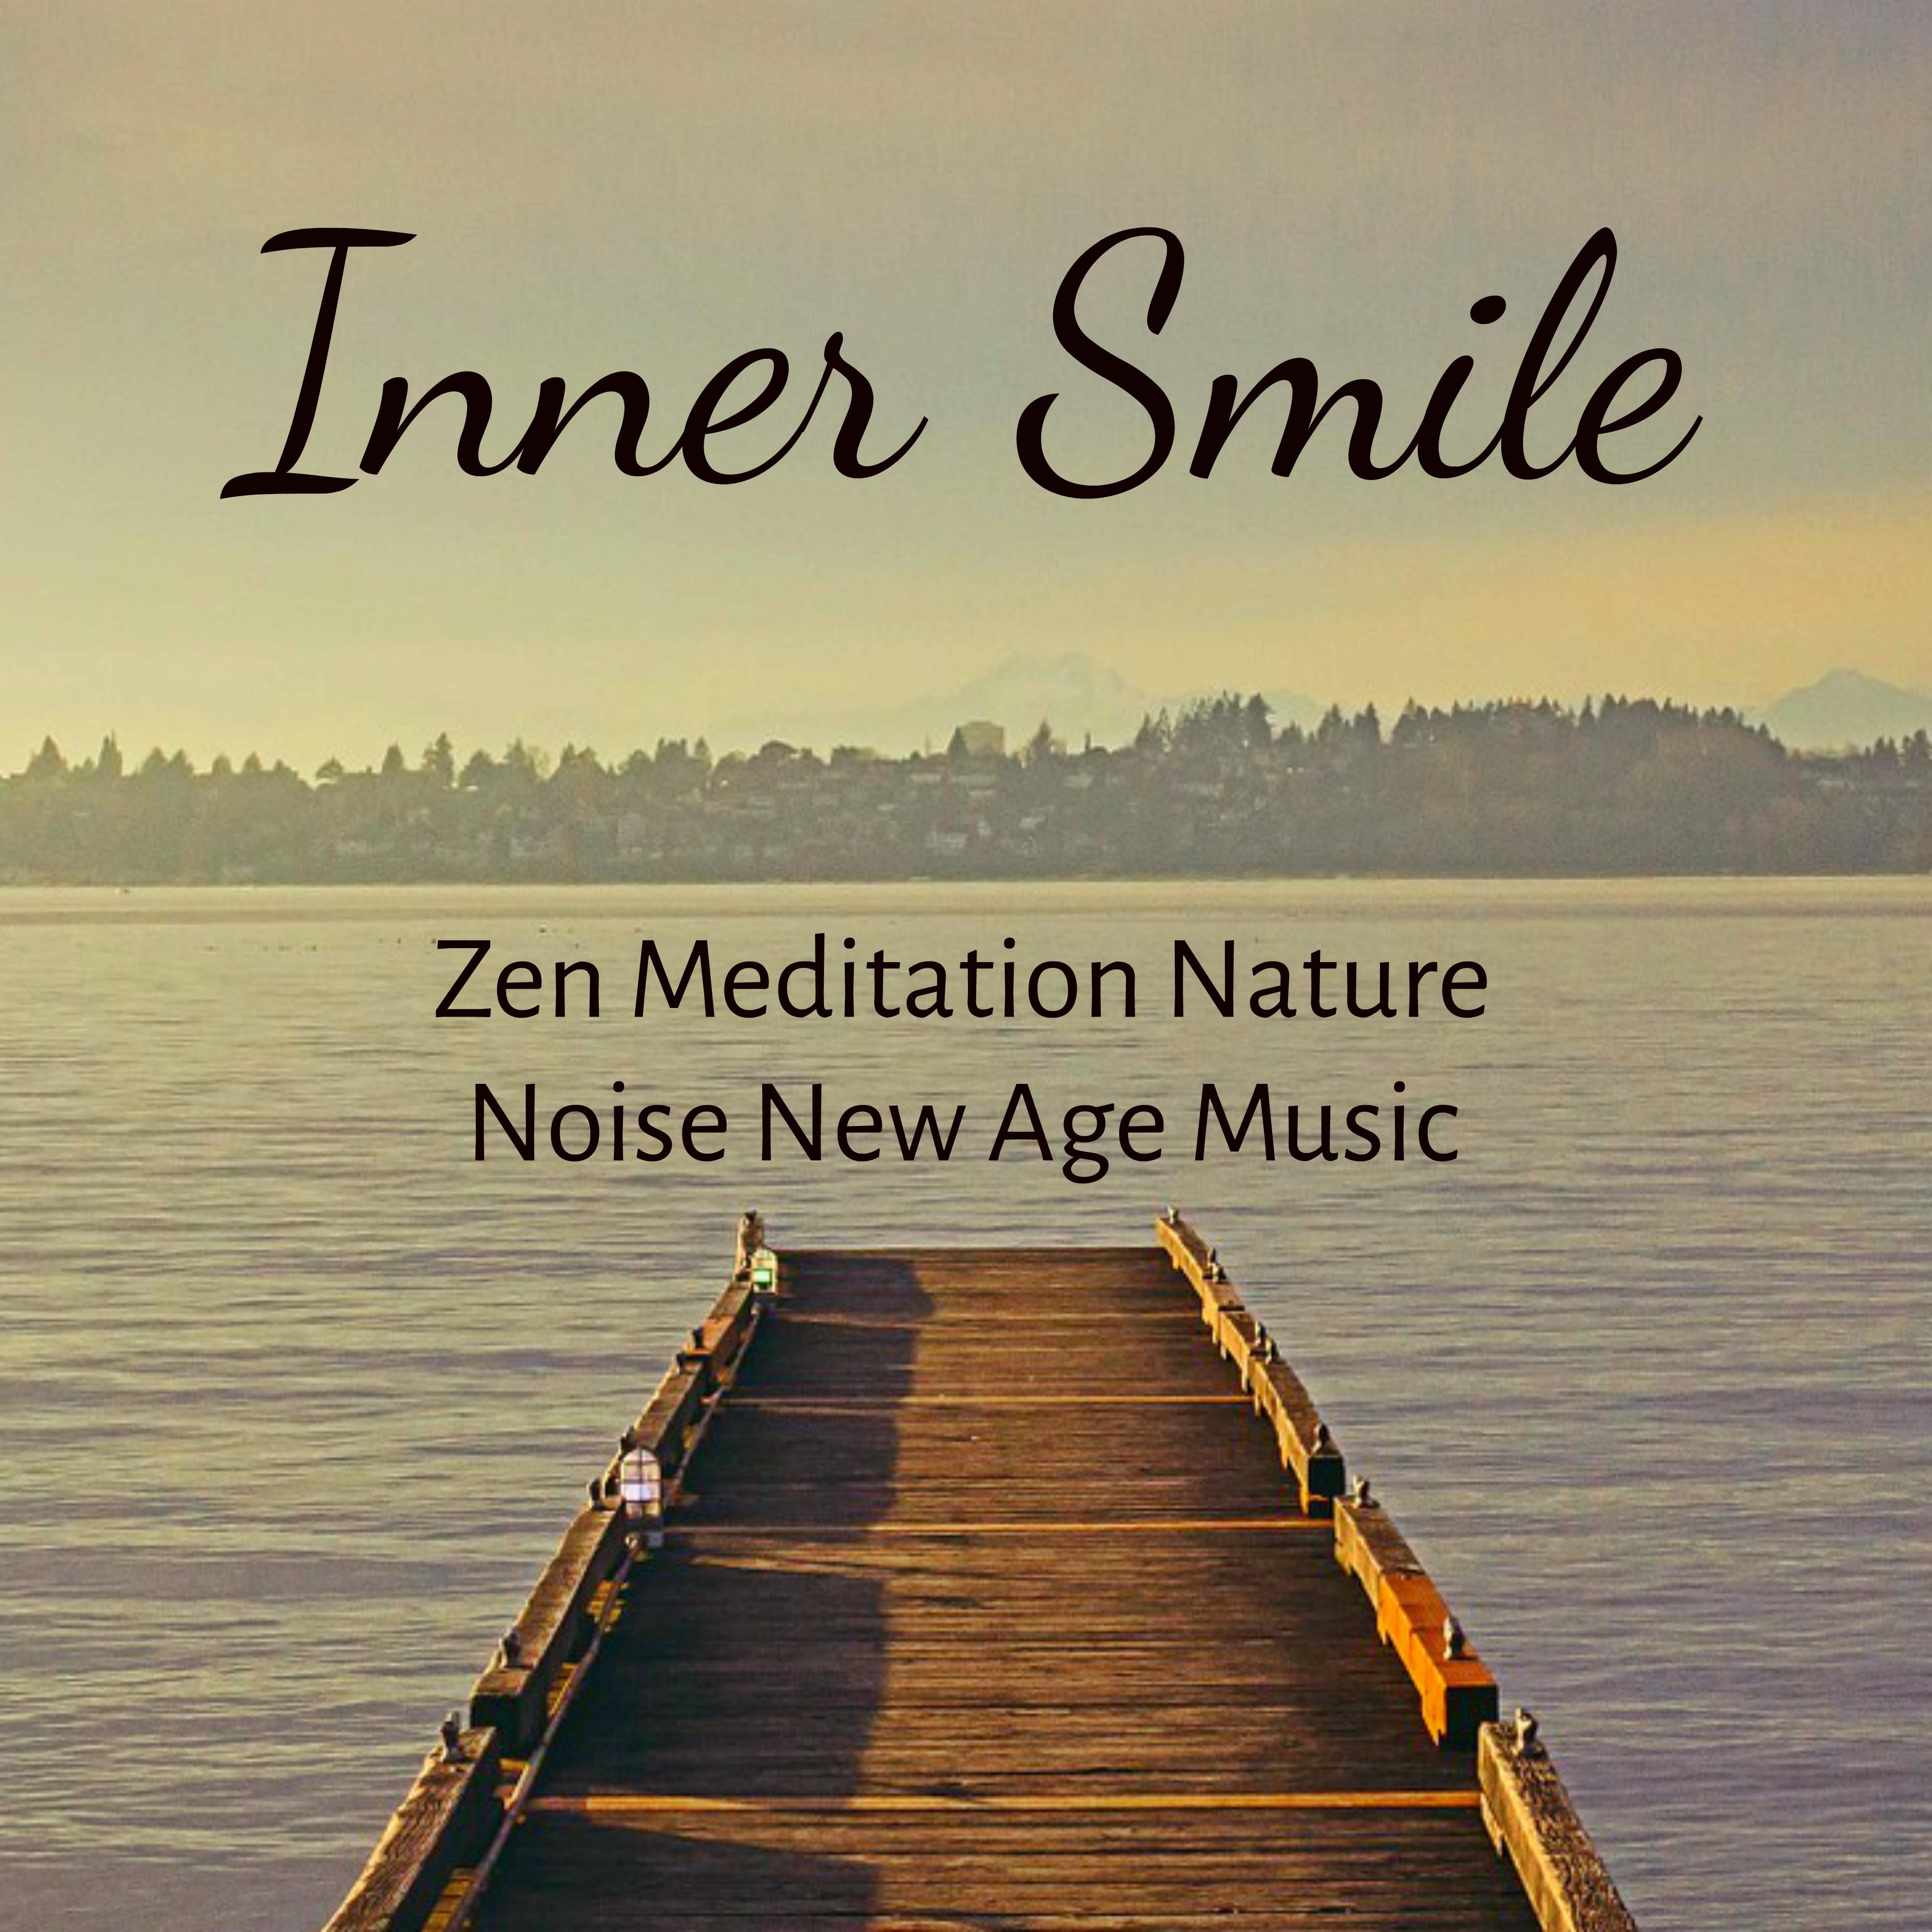 Inner Smile - Zen Meditation Nature Noise New Age Music for Harmony Wellness Time Study Program with Instrumental Healing Sounds